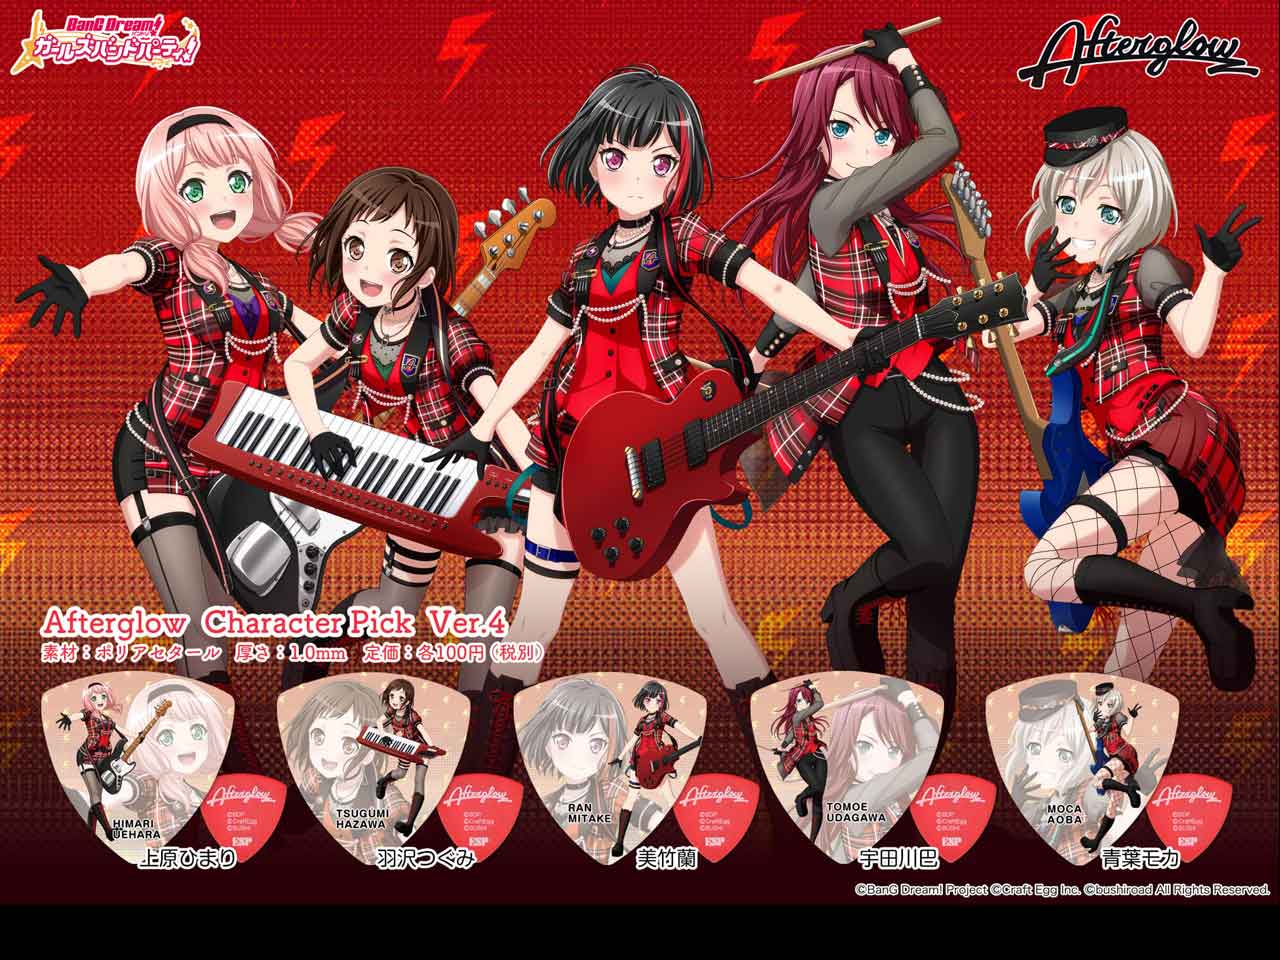 【ESP×BanG Dream!コラボピック】Afterglow Character Pick Ver.4 "青葉モカ"（GBP MOCA AFTERGLOW 4）＆”ハメパチ” セット